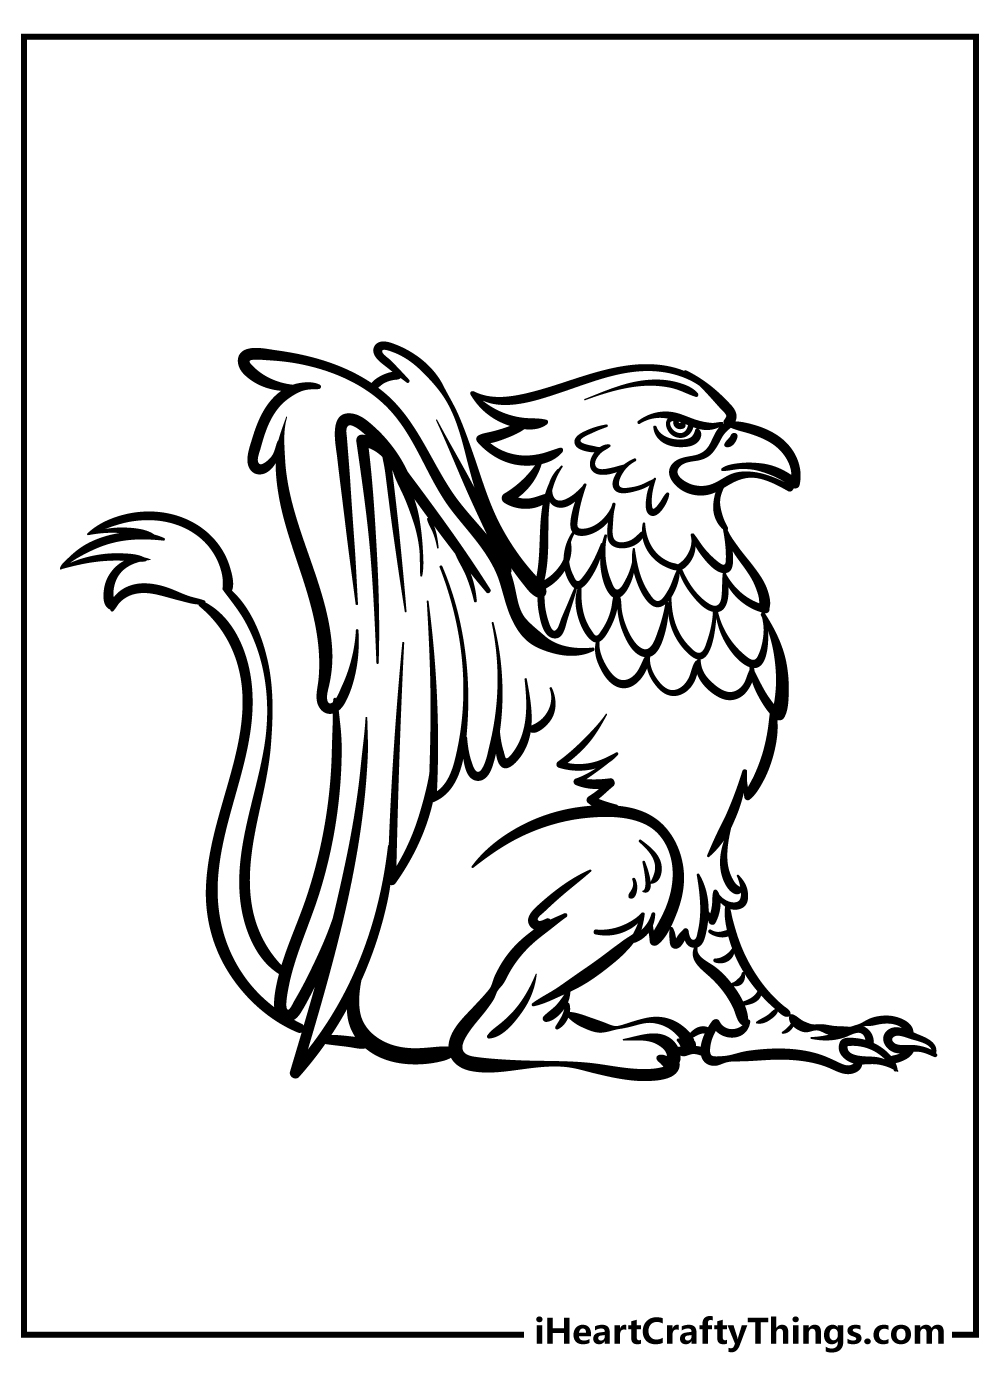 Griffin Coloring Pages for adults free printable